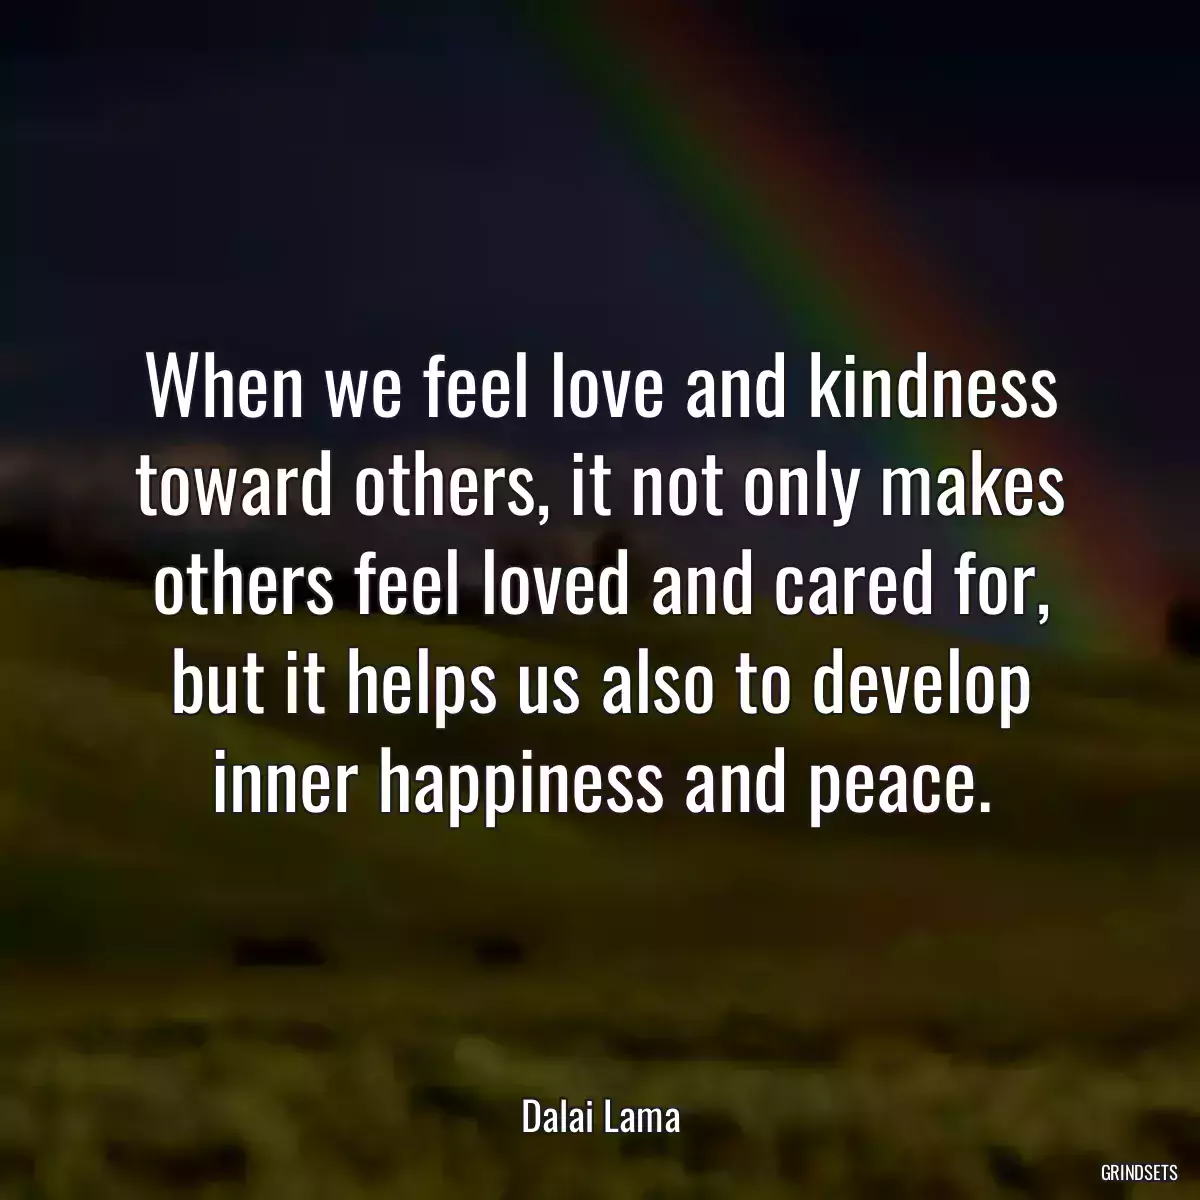 When we feel love and kindness toward others, it not only makes others feel loved and cared for, but it helps us also to develop inner happiness and peace.